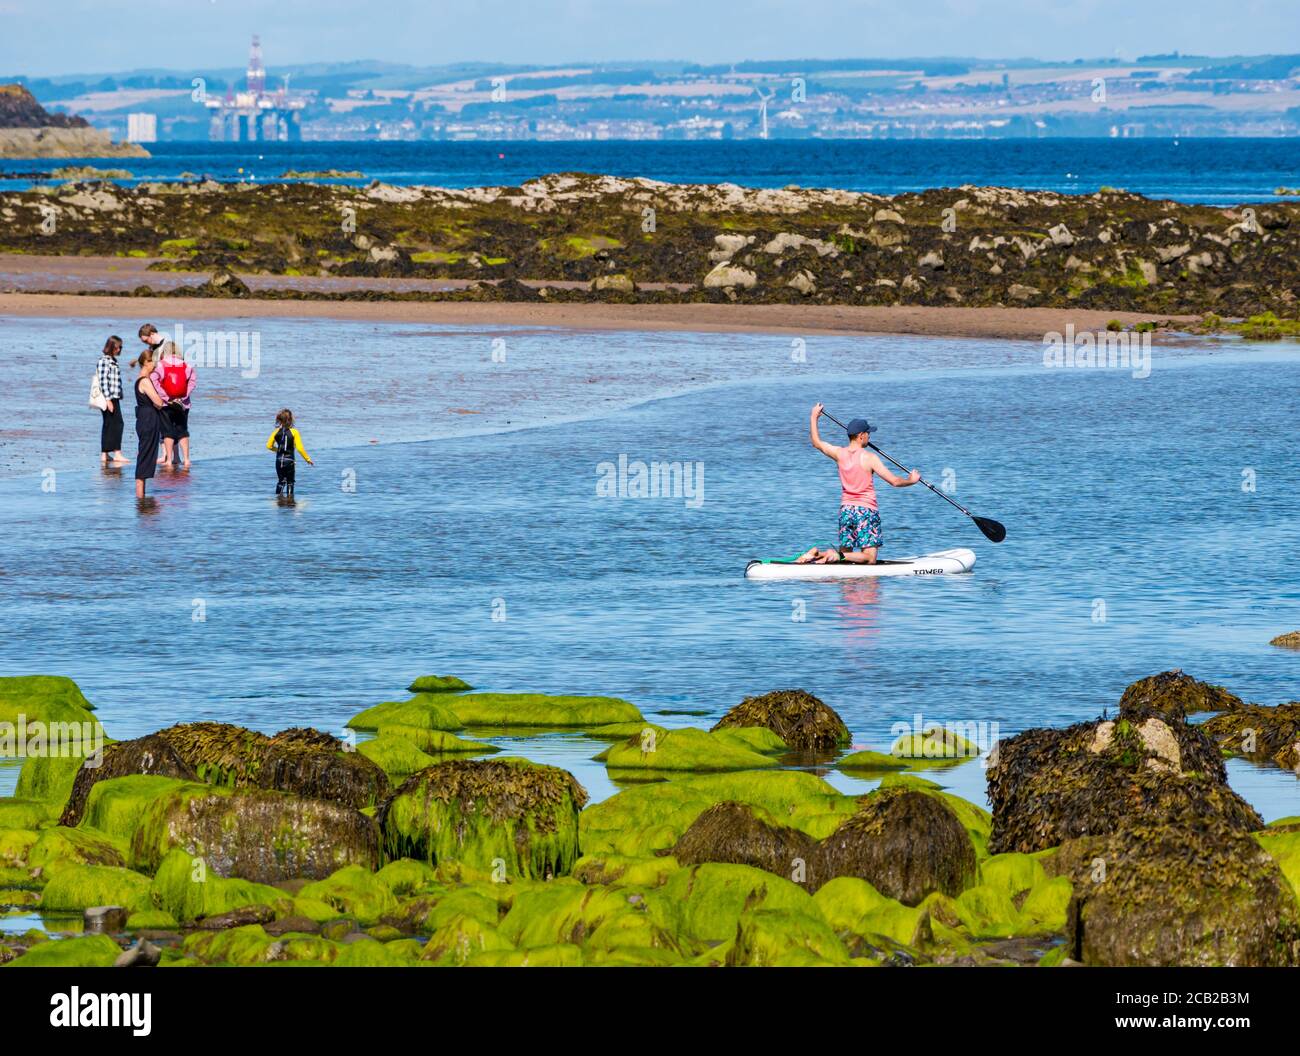 Man paddle boarding on hot Summer day in West Bay with seaweed on rocky shore, North Berwick, East Lothian, Scotland, UK Stock Photo